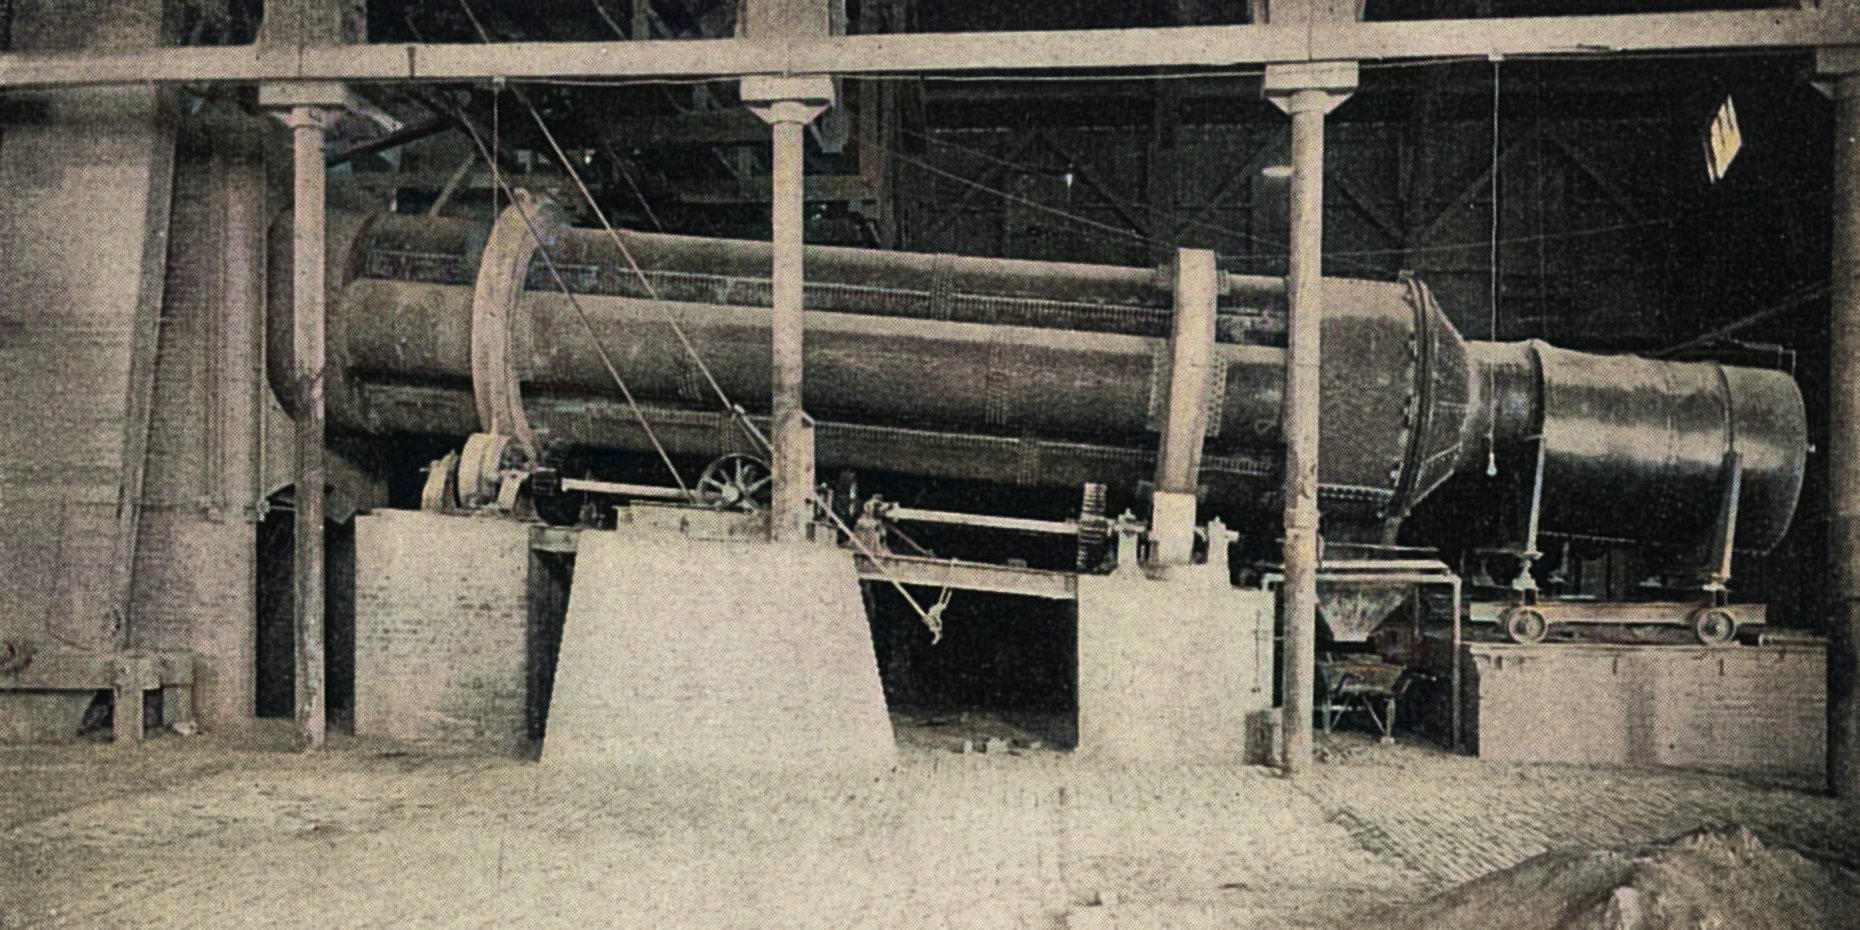 View of one of the six tubular roasting furnaces that was in use at the Metallic Mill back in 1897/98 when this image was taken. The tubular roasting furnaces was of the same general design as the dryers; 'which was four steel tubes nested together inside two track-bands and connected at the feed and discharge ends by two hoods. The tubes were lined with fireclay tile and revolve as one cylinder,' they were, however, built much stronger. The discharge was also different.
   As the text this image came with said; ''In the standard roaster the tubes are 29 ft. long by 25 in. diameter inside the lining. They make one revolution in 4.8 minutes and average 48 tons per day from 2% to 0.1% sulphur. The roasted ore is discharged continuously through a series of openings in the periphery of the hood. All these except the two over the ore-hopper at any one time are covered with a band of iron which prevents the exit of flame around the top of the furnace. The fire-box is built of steel plate and mounted on wheels. The furnace is driven with friction wheels at each track band, operated through a differential drive which insures an absolutely even motion. These furnaces are patented in the United States and abroad.''
   This seems to have been an invention by Philip Argall and hence it is named 'Argall Roasting Furnace'. I did procure the colored version of this image. Source was gray-toned, or in common speech black & white. Used an online service and tweaked and worked with image to get what looks best to my eyes for the moment.